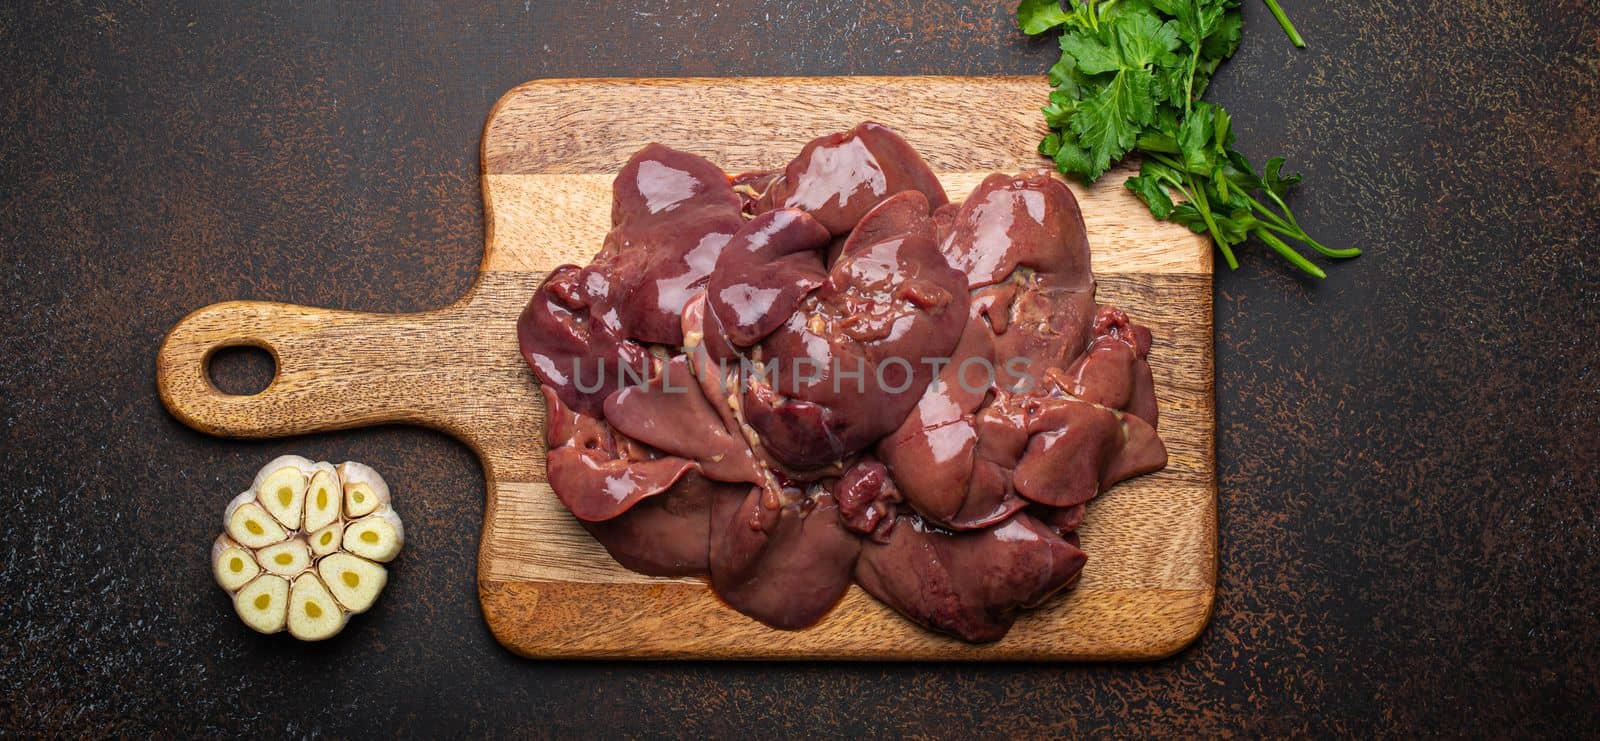 Raw chicken liver on wooden cutting board top view on dark rustic concrete background kitchen table with parsley and garlic. Healthy food ingredient, source of iron, folate, vitamins and minerals